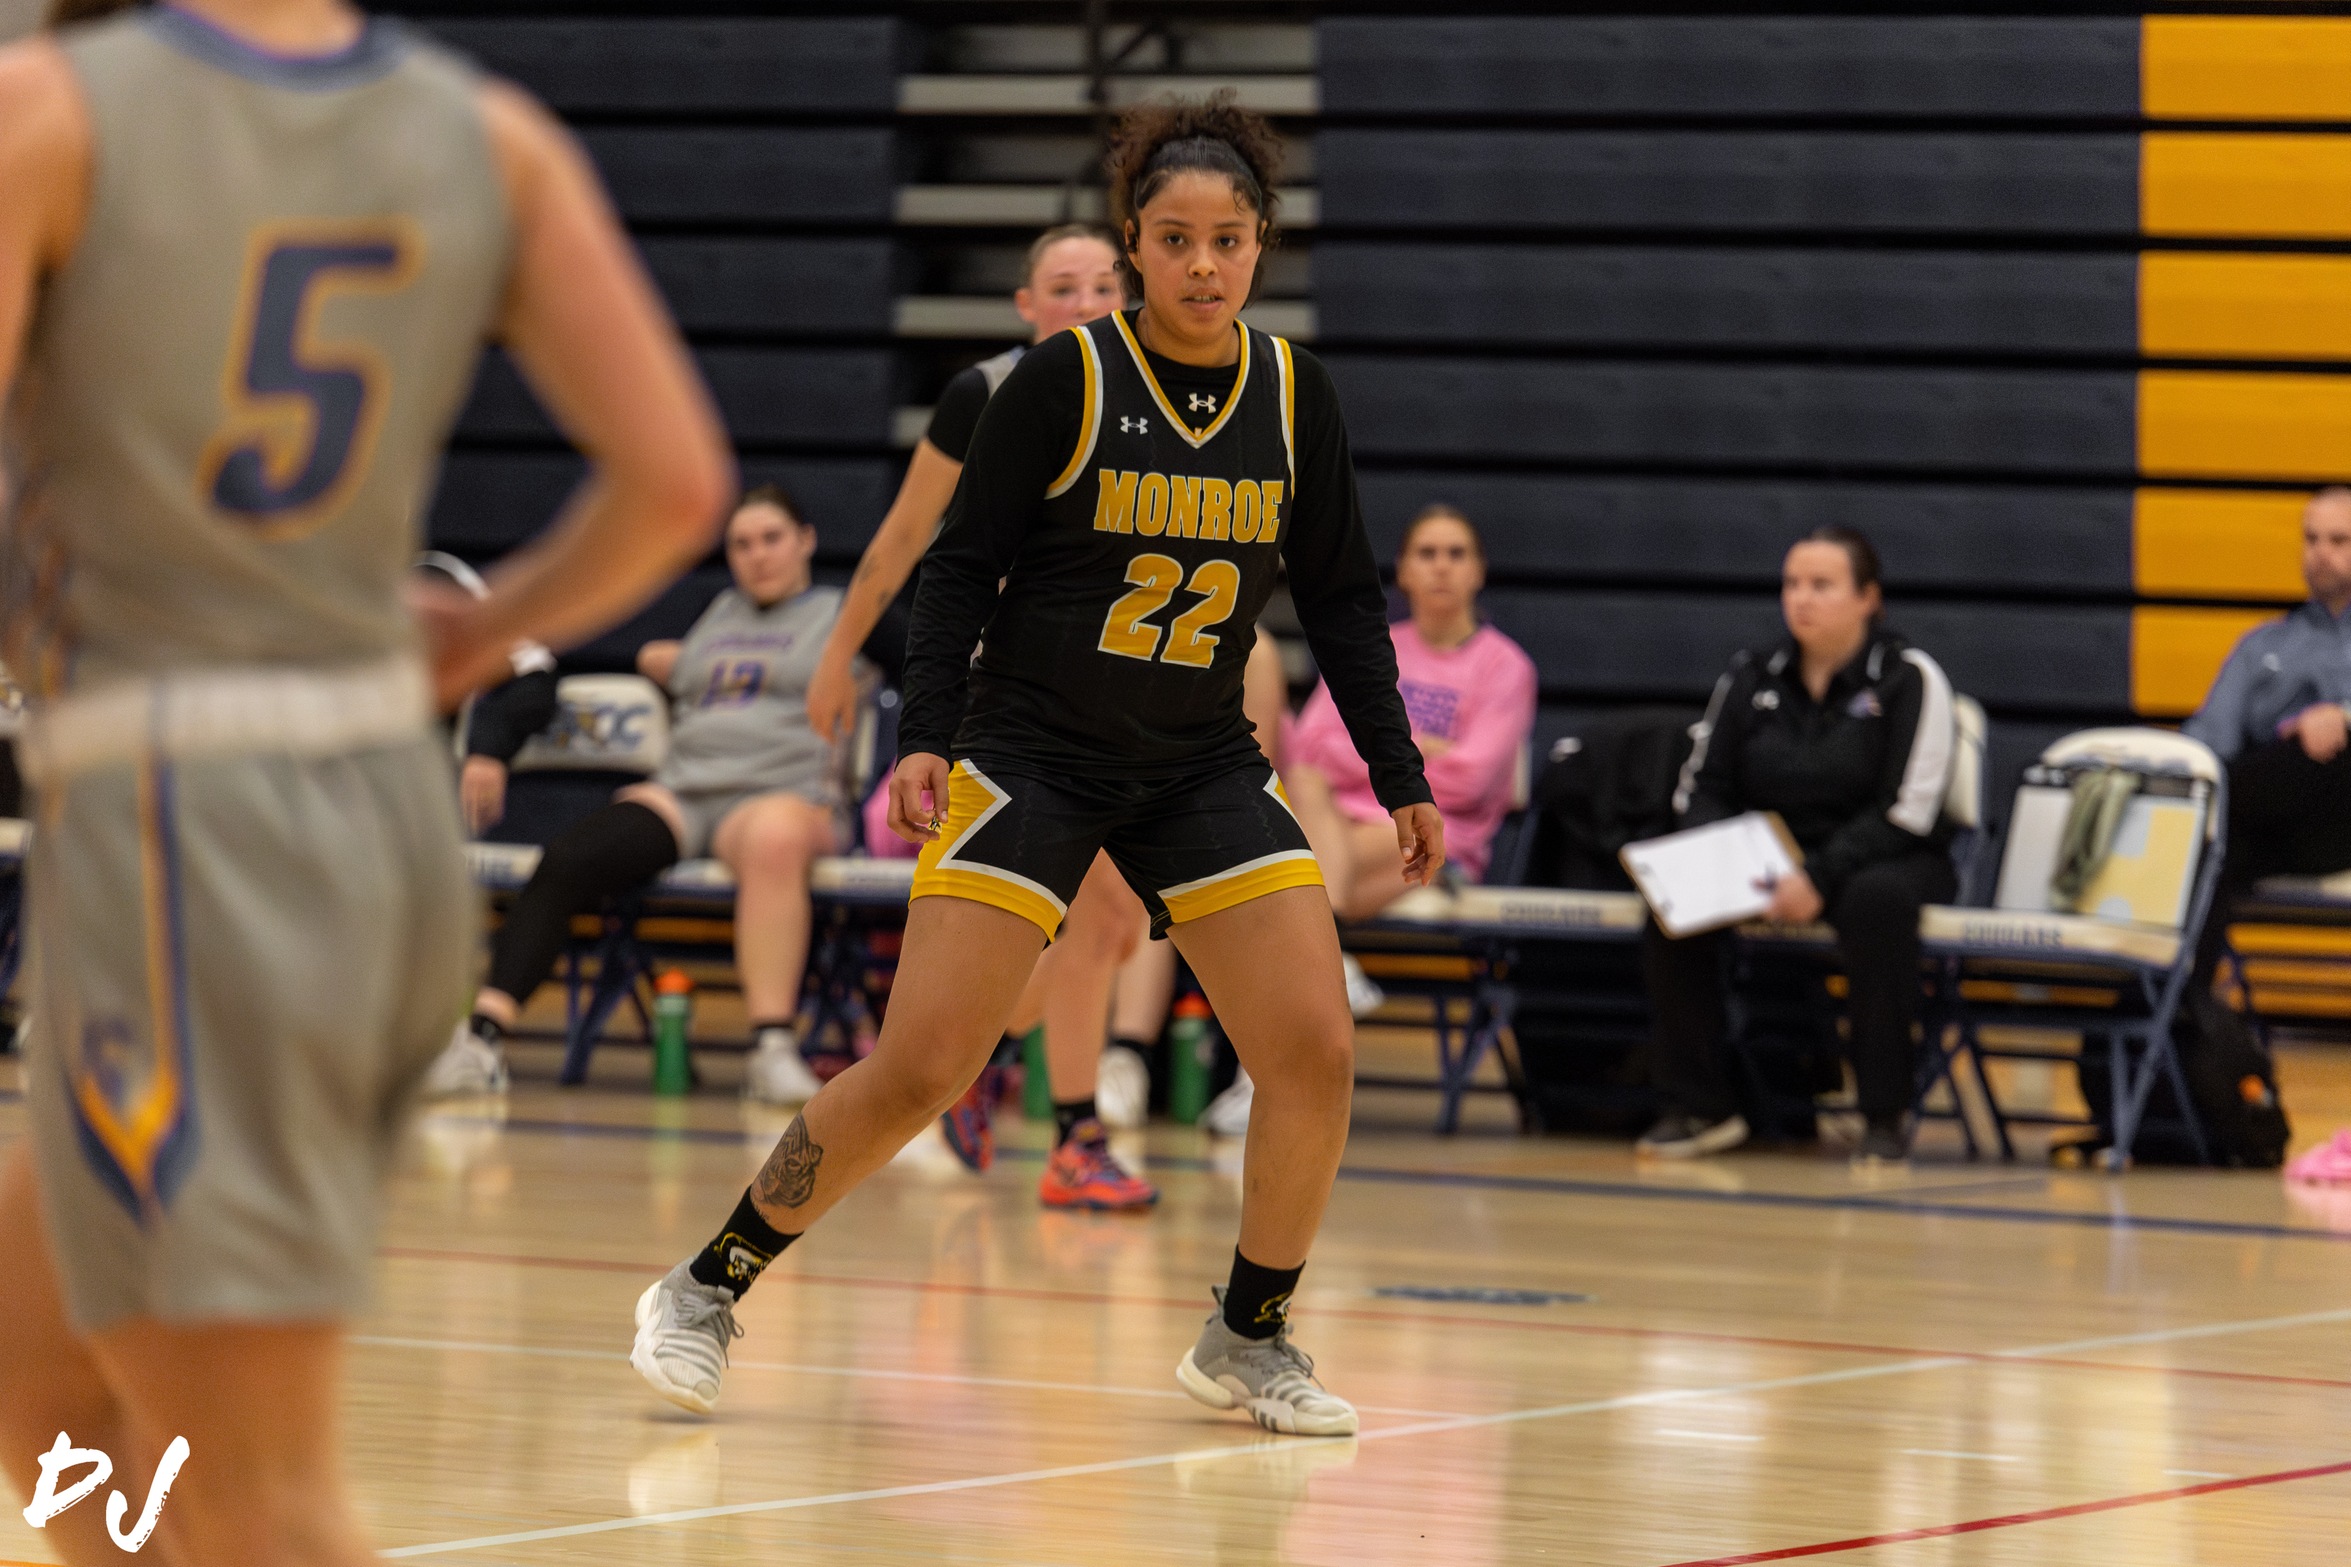 Lady Tribunes Show Tremendous Heart in 56-40 loss to DI Mustangs